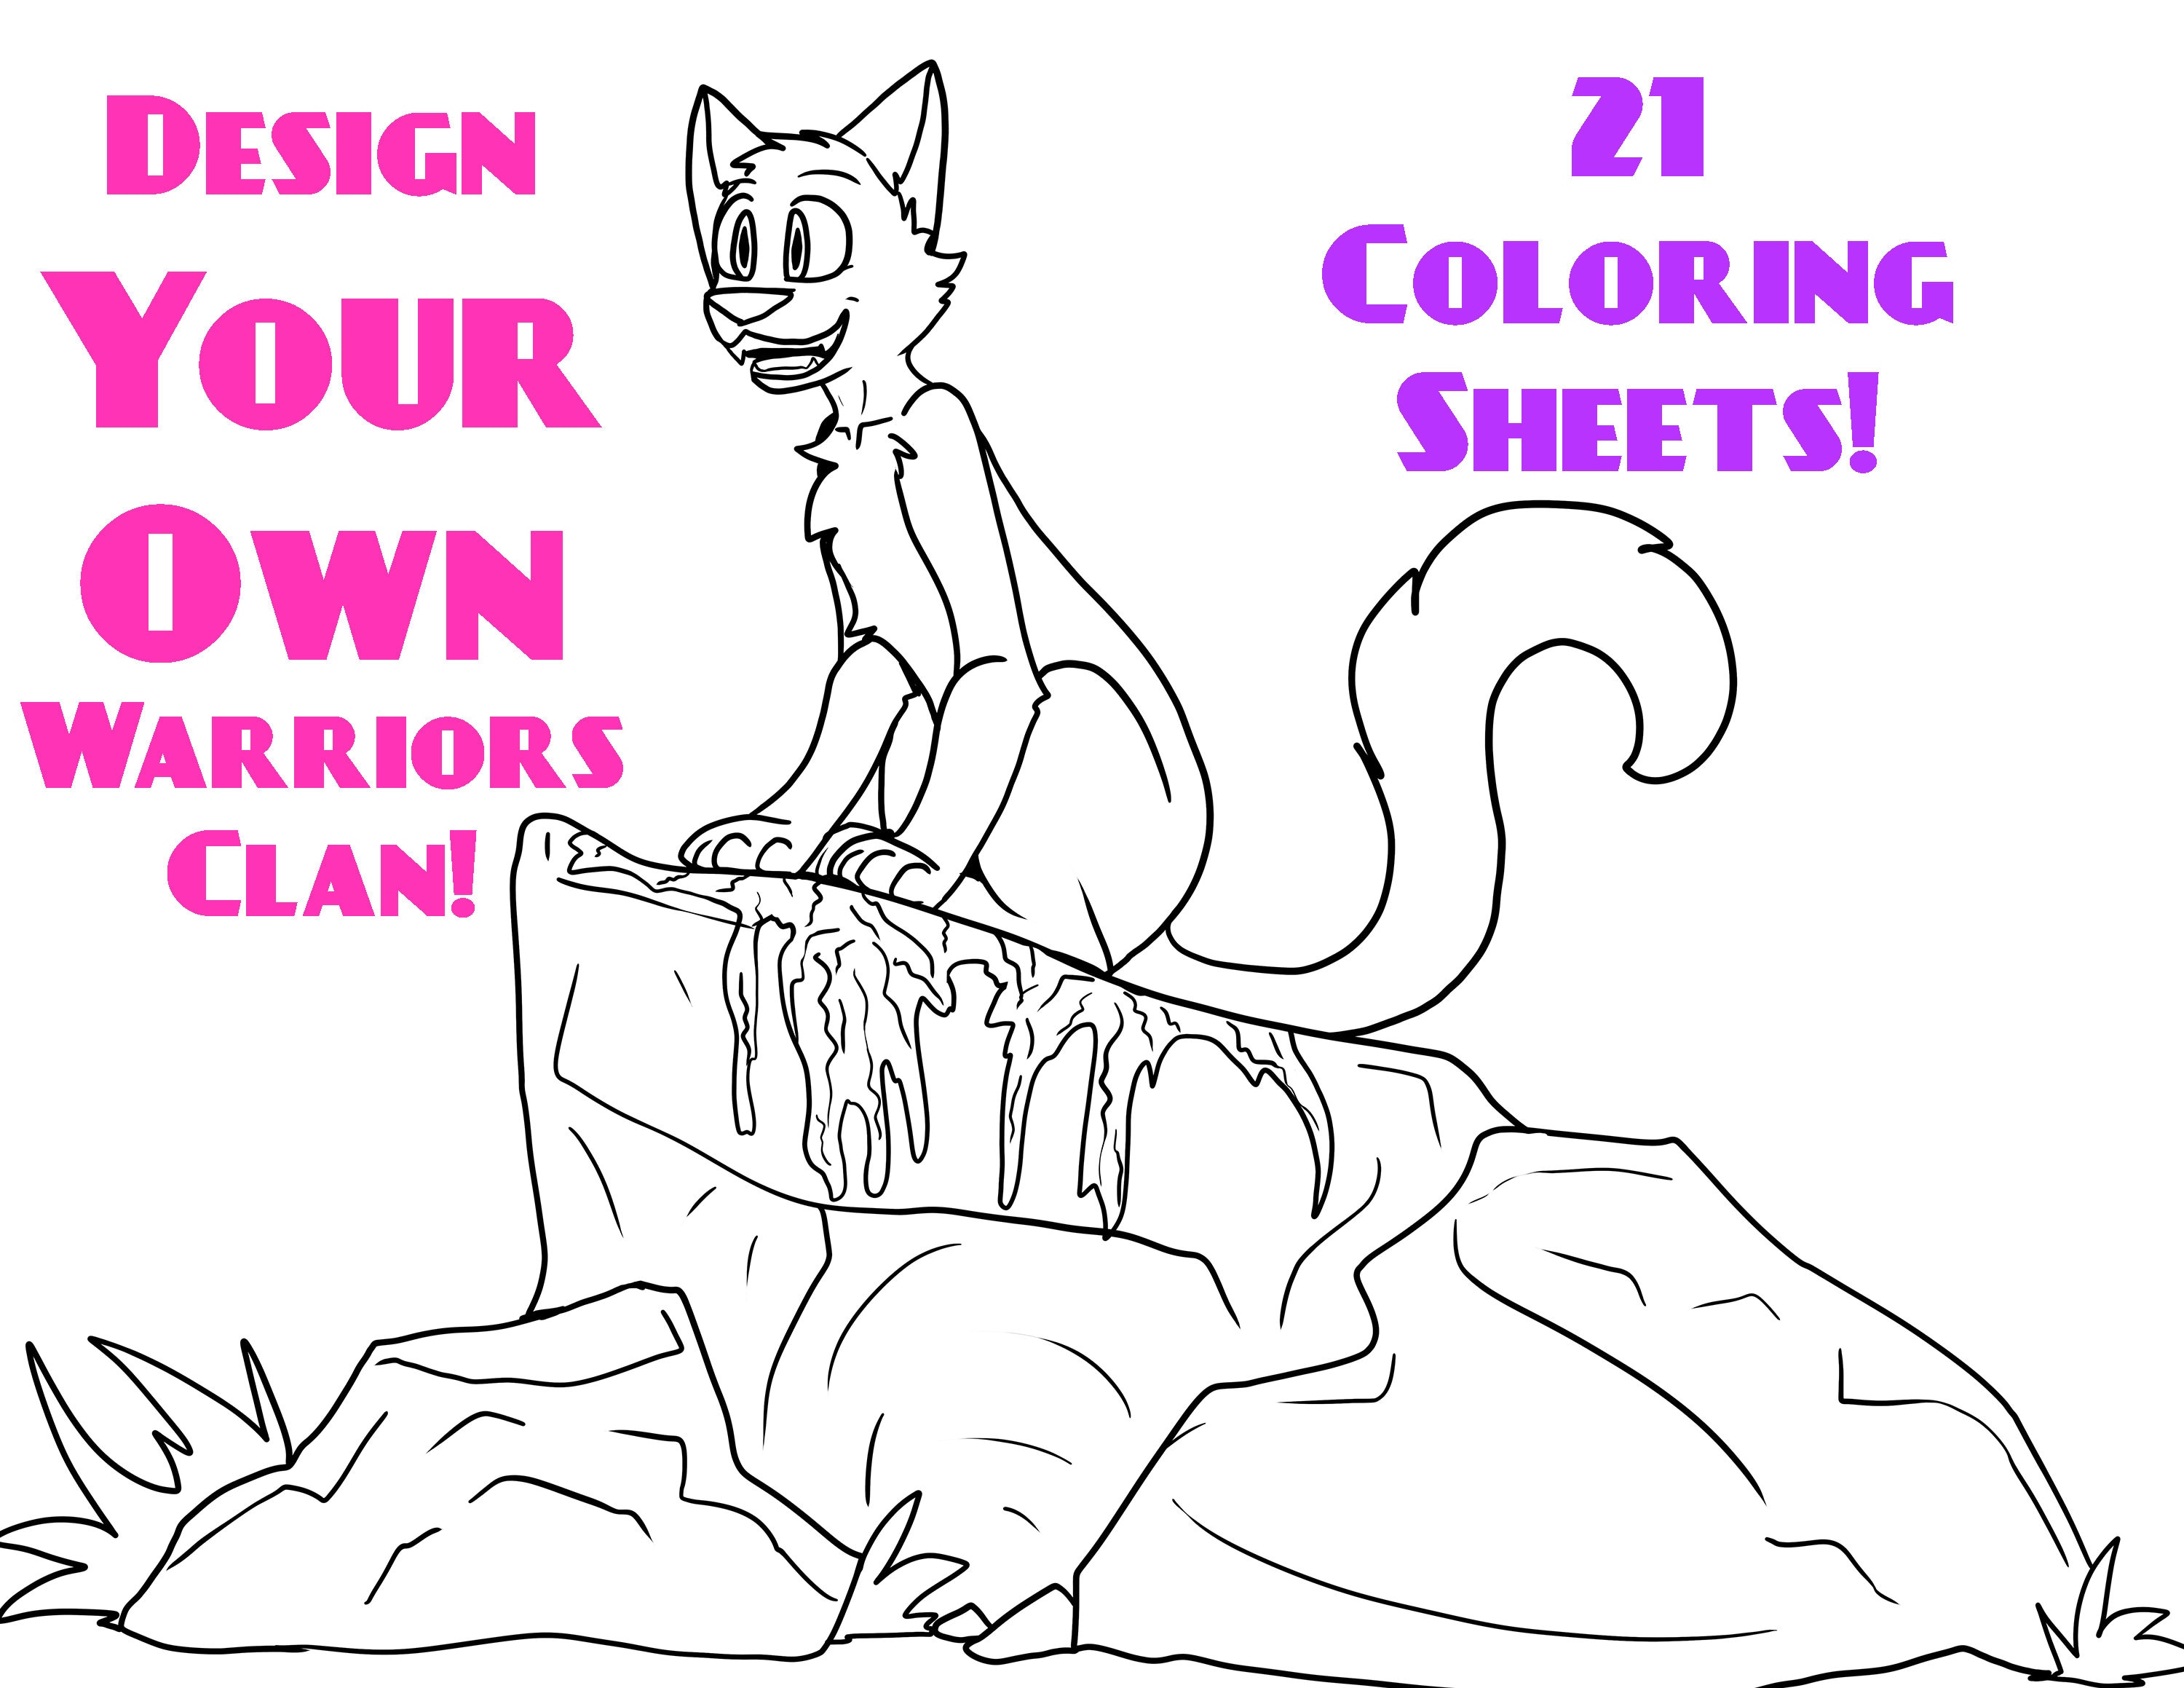 Design your own clan downloadable coloring sheets